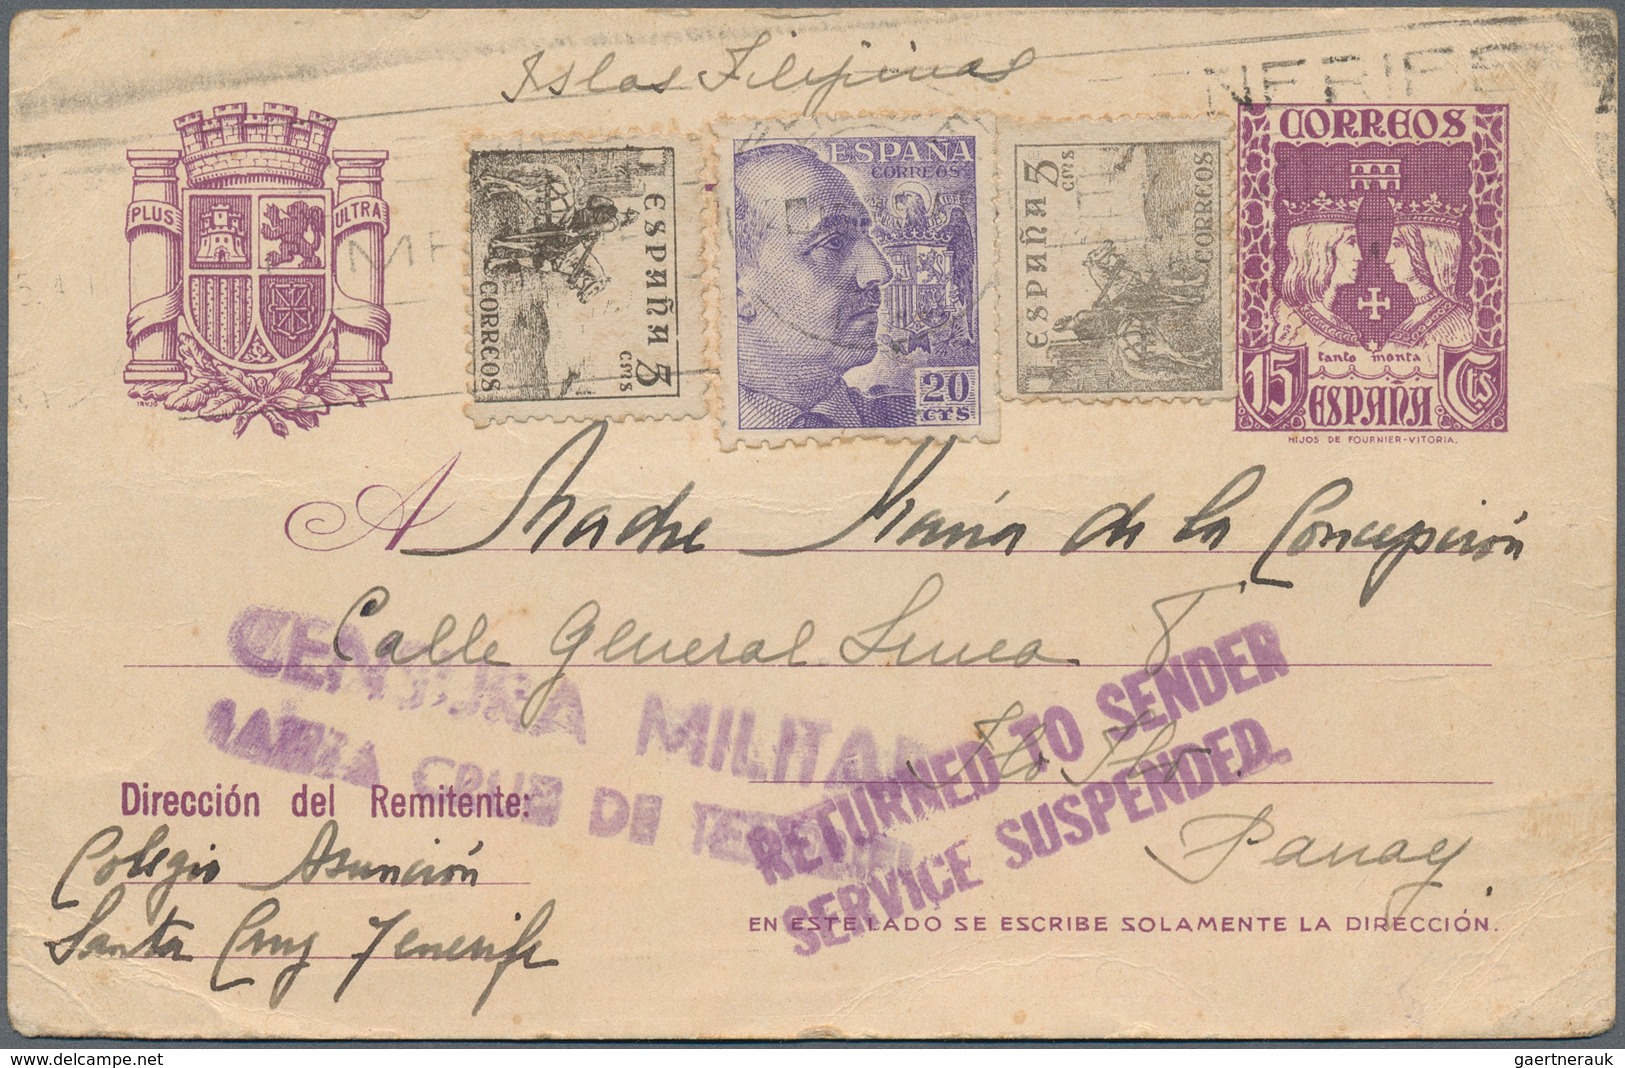 Spanien - Ganzsachen: 1945, Spain Postal Stationery Card 15 C. Violet Upgraded With SG 878, 5c Sepia - 1850-1931